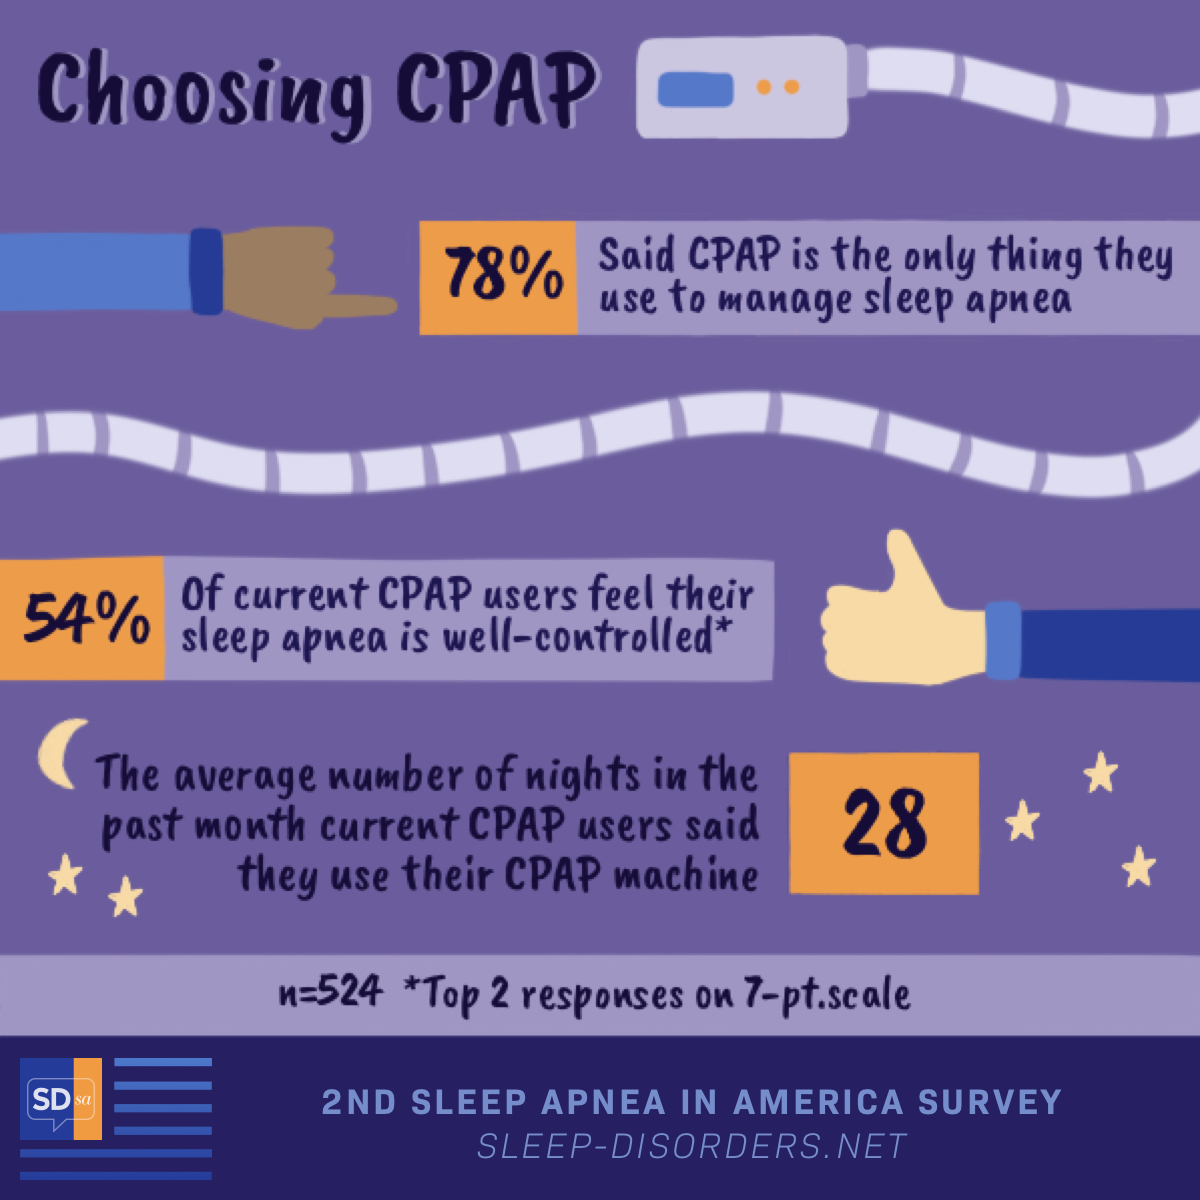 According to the 2nd Sleep Disorders In America survey, 78% of respondents only use CPAP to manage sleep apnea, 54% of current users feel well-controlled, and users average 28 nights per month on CPAP.